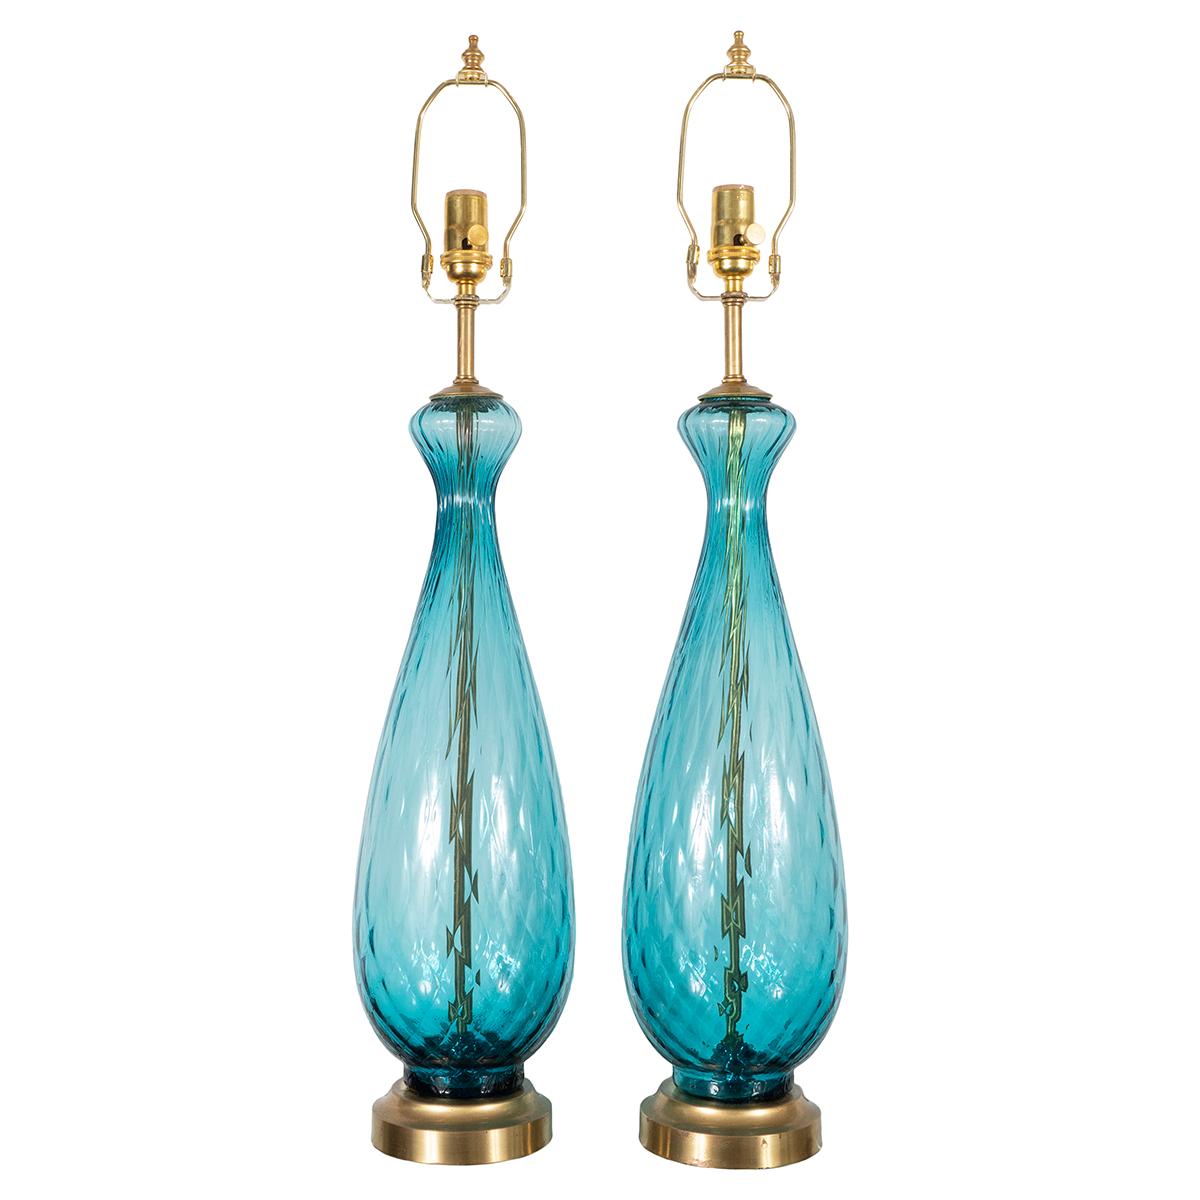 Pair of pale blue murano glass lamps with fine patterned fluting and brass hardware.